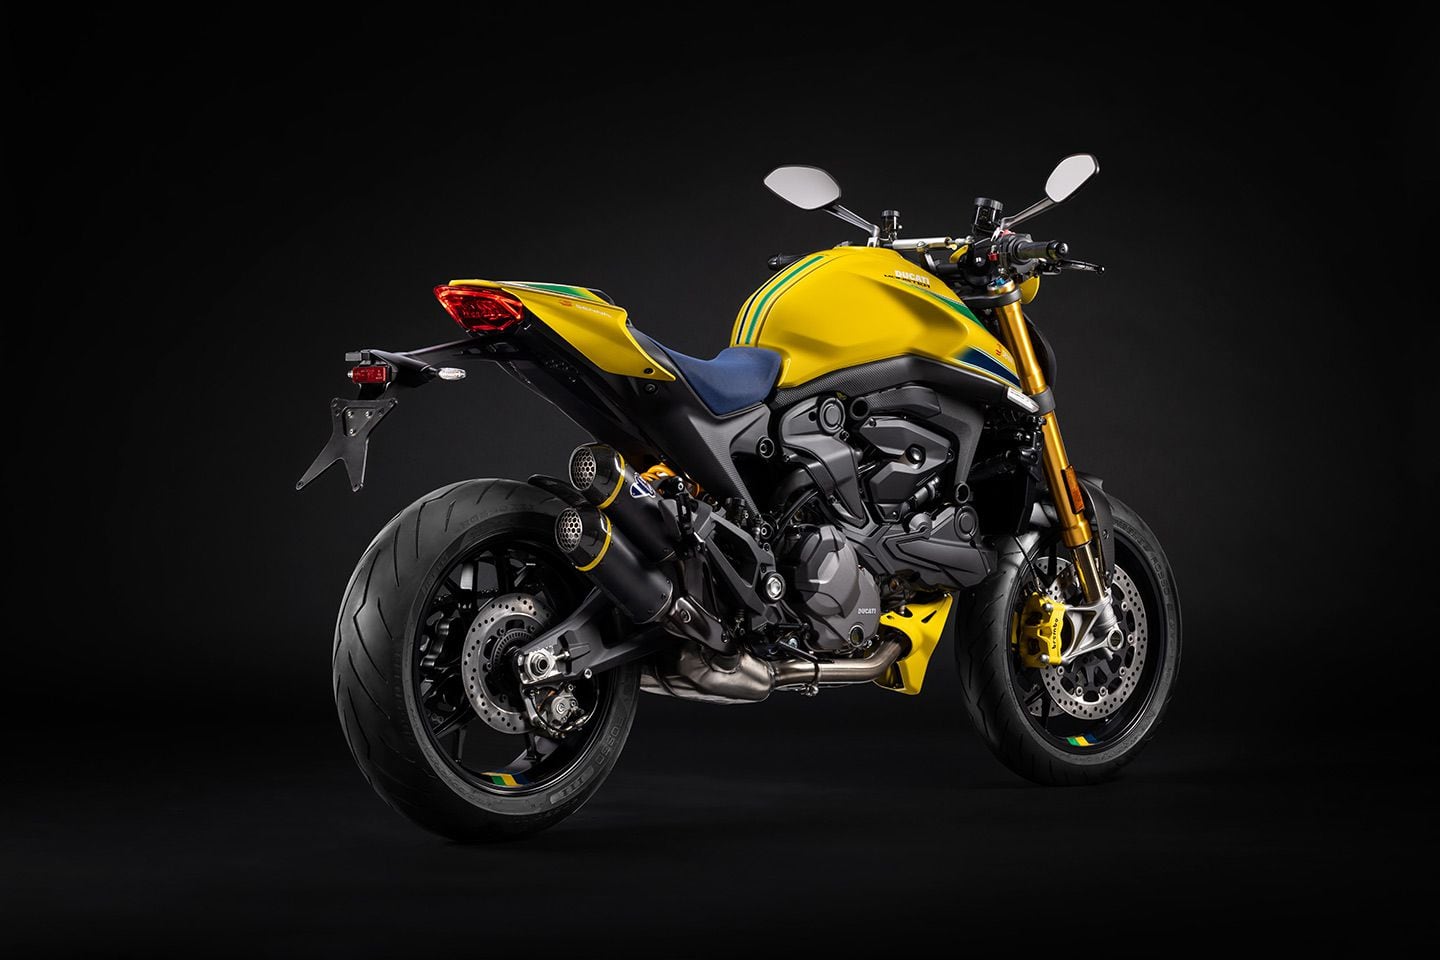 Ducati’s latest Senna model comes with Öhlins suspension and a special Termignoni exhaust.